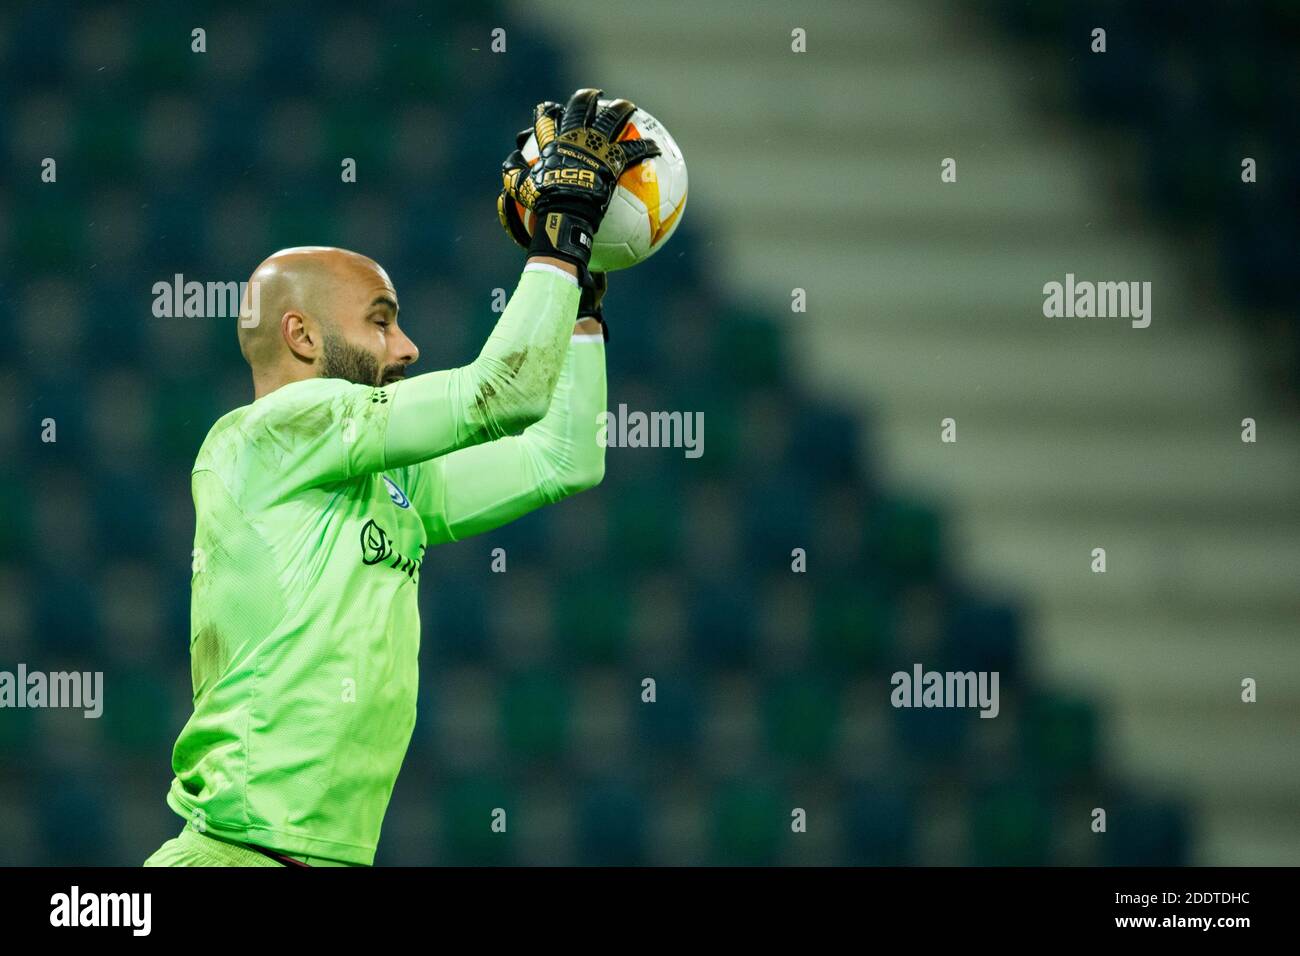 Gent's goalkeeper Sinan Bolat pictured in action during a soccer match between Belgian club KAA Gent and Serbian team Crvena Zvezda (Red Star Belgrade Stock Photo